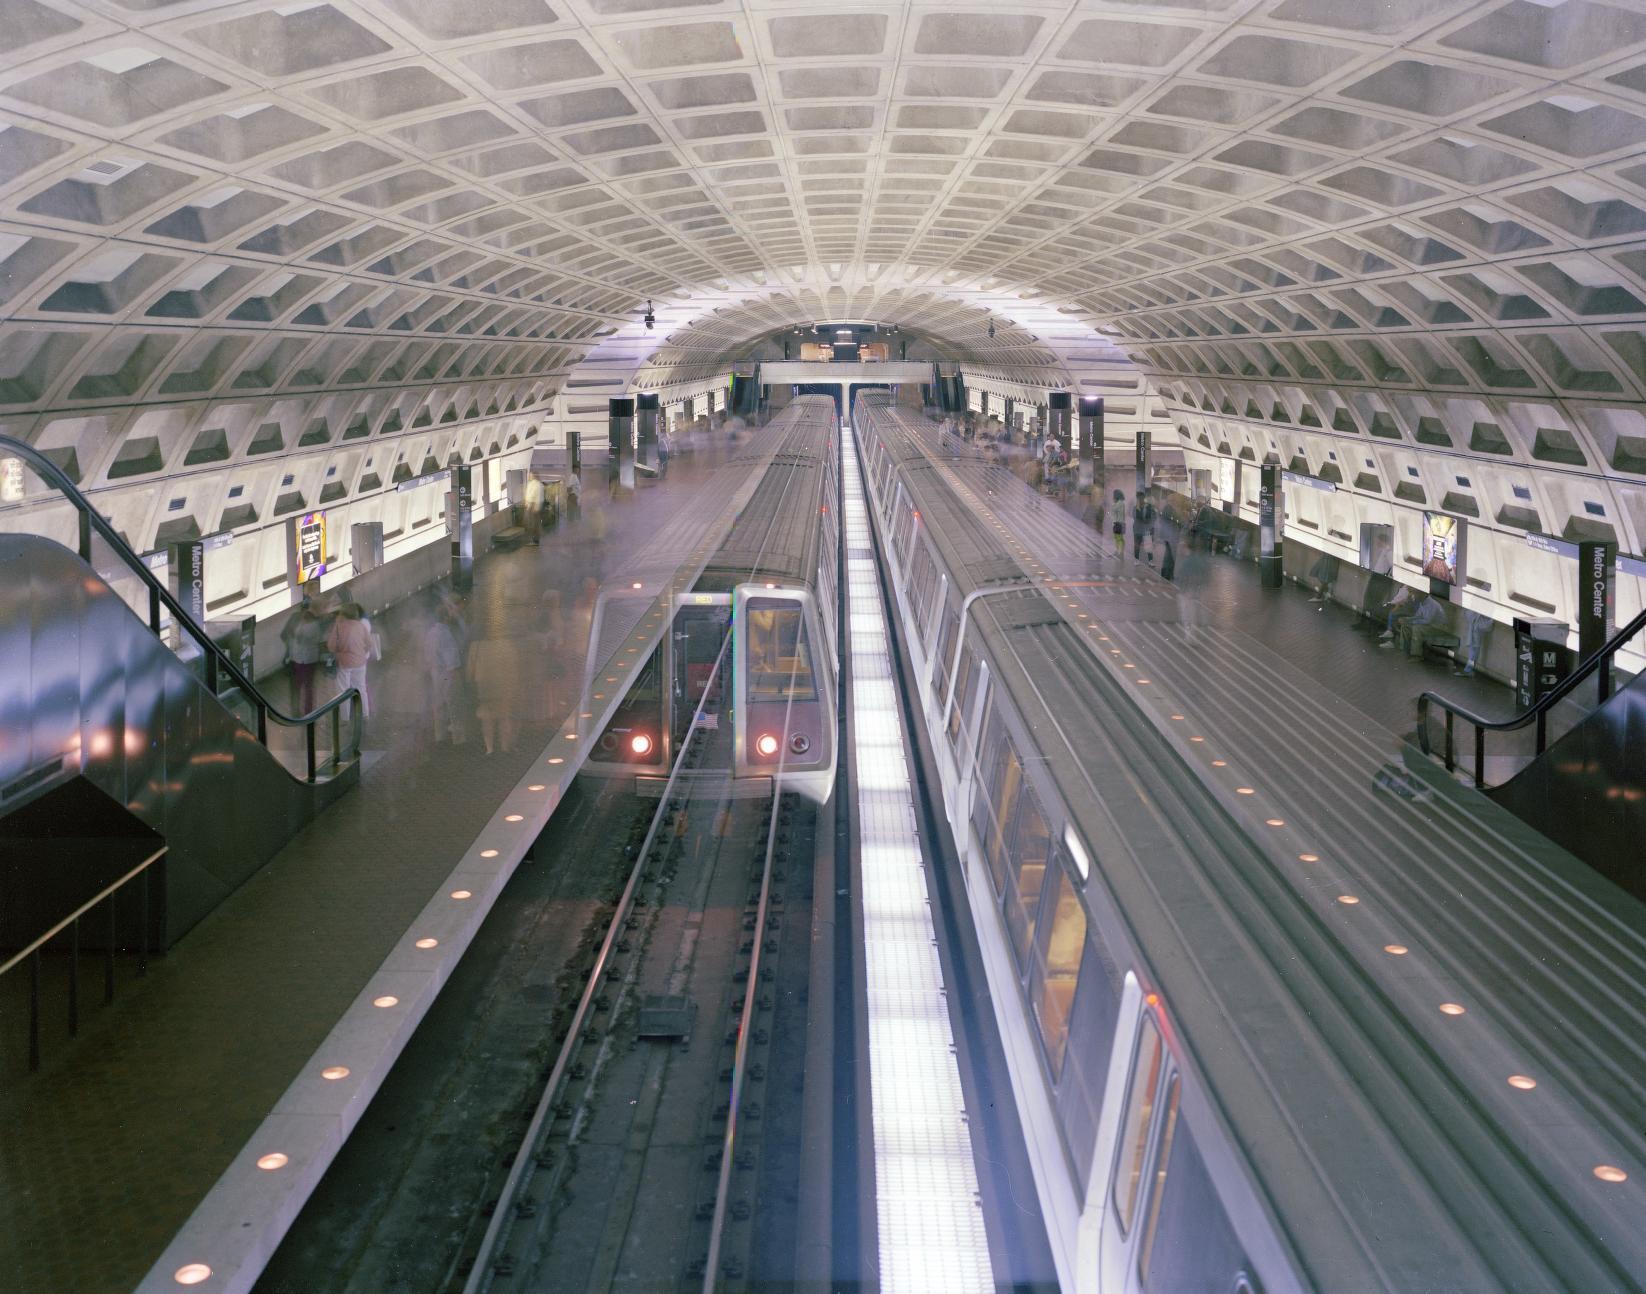 An overhead view of a DC Metro stop with trains running in either direction and blurry people moving around on the platforms. The signature egg carton-esque ceiling arches overhead.